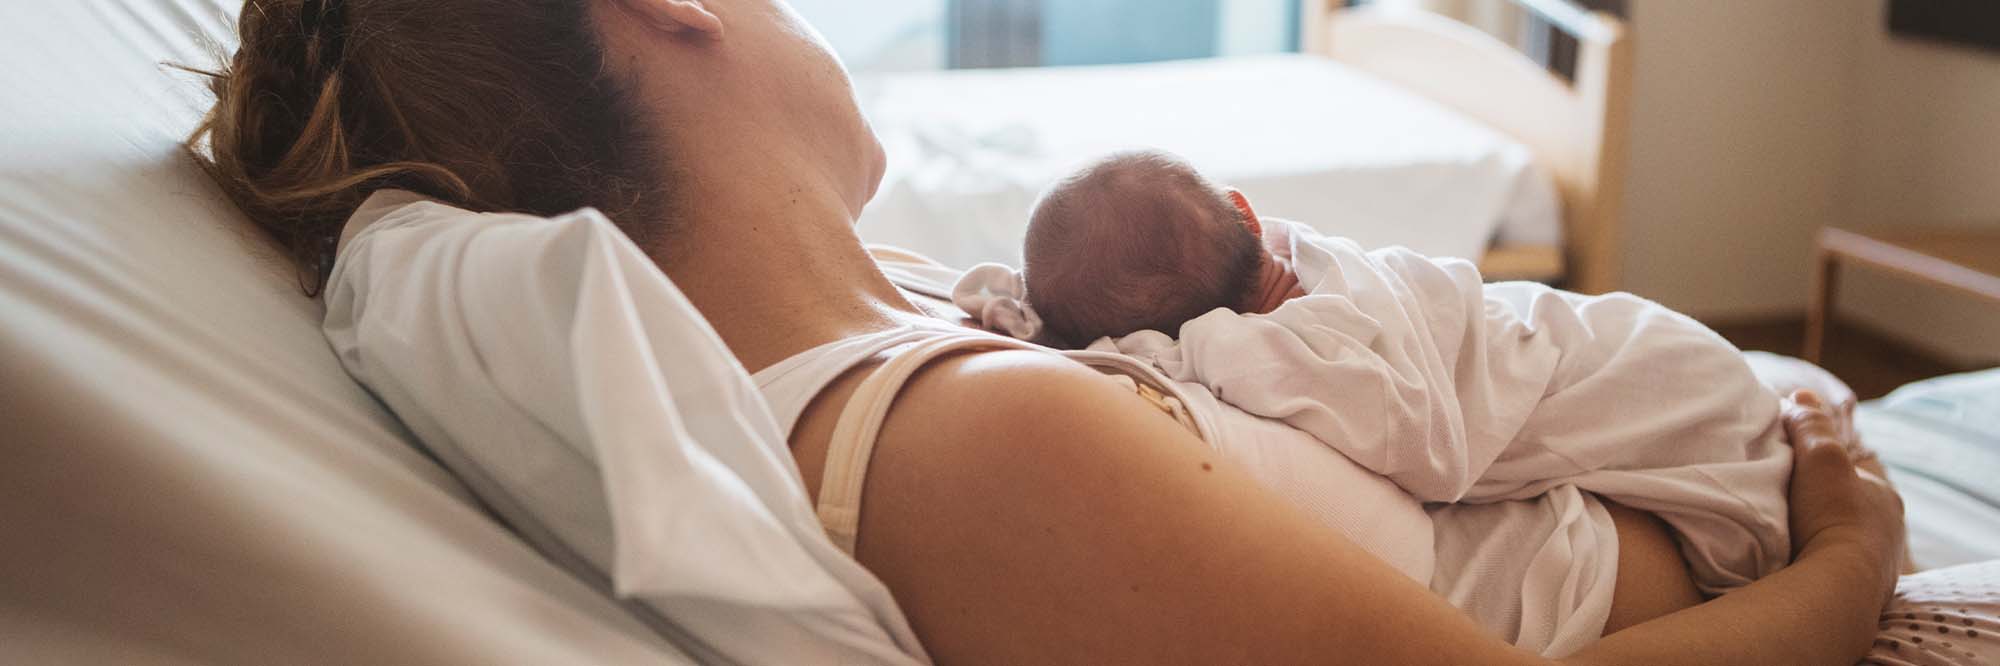 What is a C-section? Mom shares delivery, recovery experience